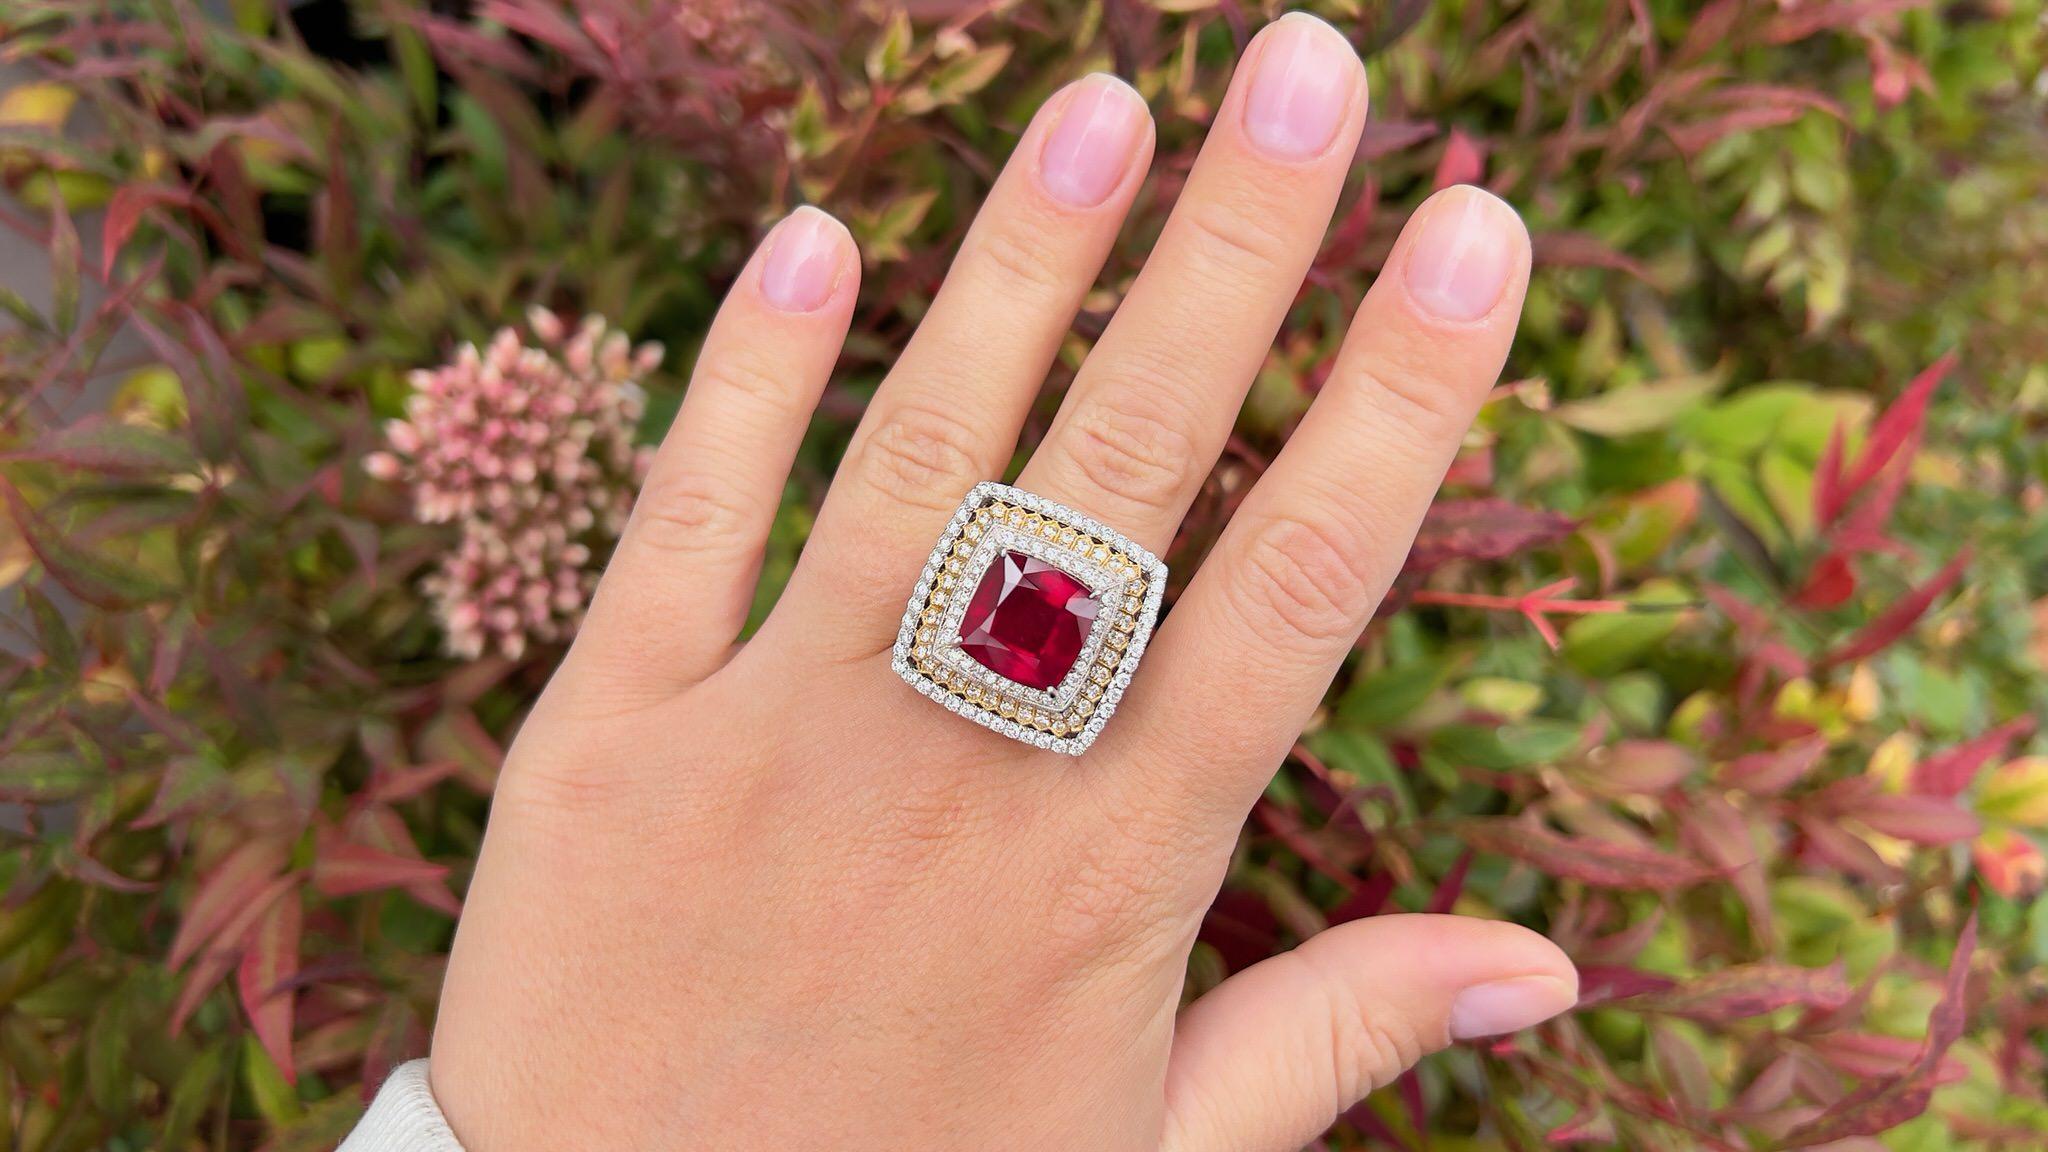 Fine Ruby = 11.04 Carat
Diamonds = 2.98 Carats
(Color: F, Clarity: VS)
Metal: 18K Gold
Ring Size: 7 US
Jewelry Gift Box Included